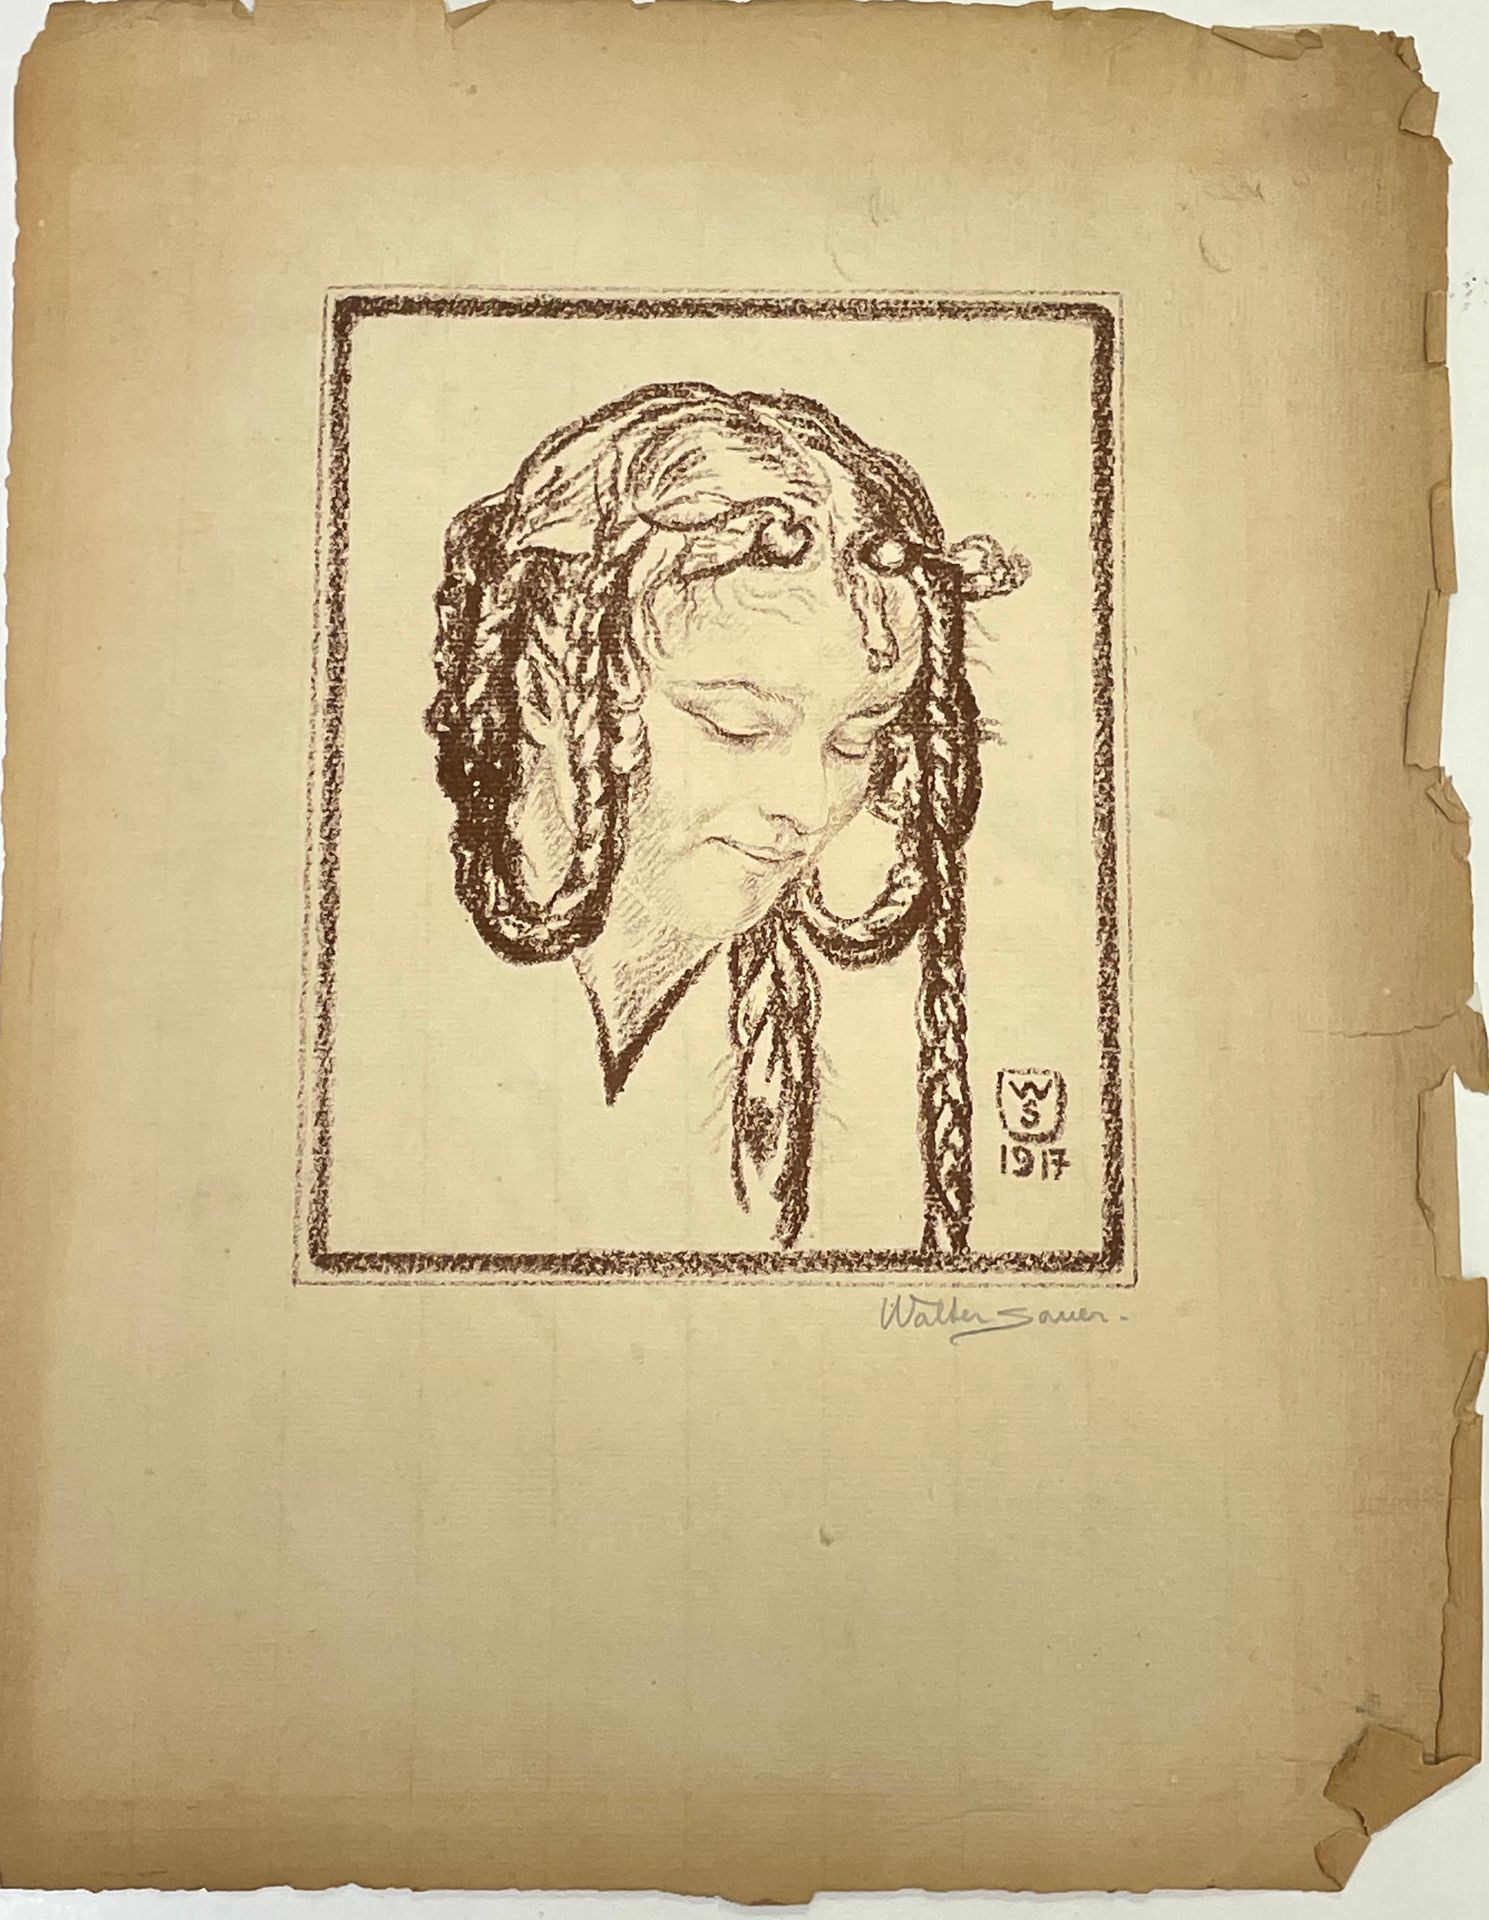 SAUER (Walter). "Young Girl" (1917). Monochrome lithograph printed on laid paper&hellip;